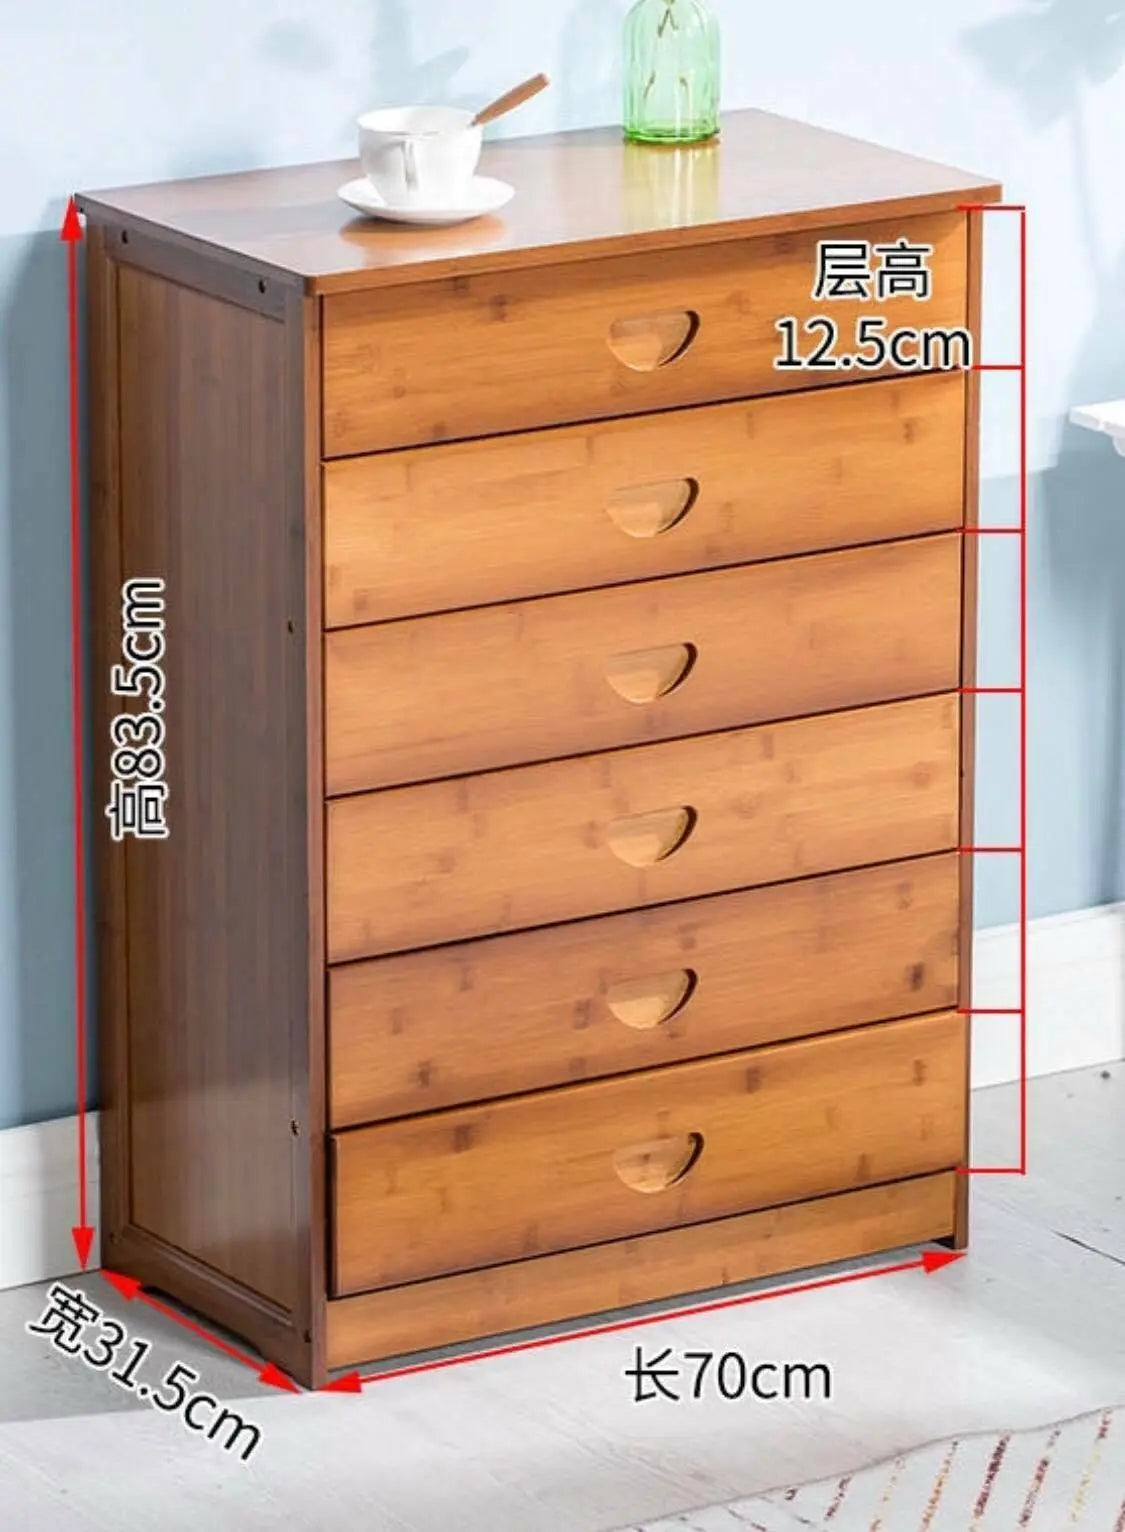 Solid Bamboo Modern Drawer Chest Cabinet Table Bedroom Storage Choice Elegant everythingbamboo